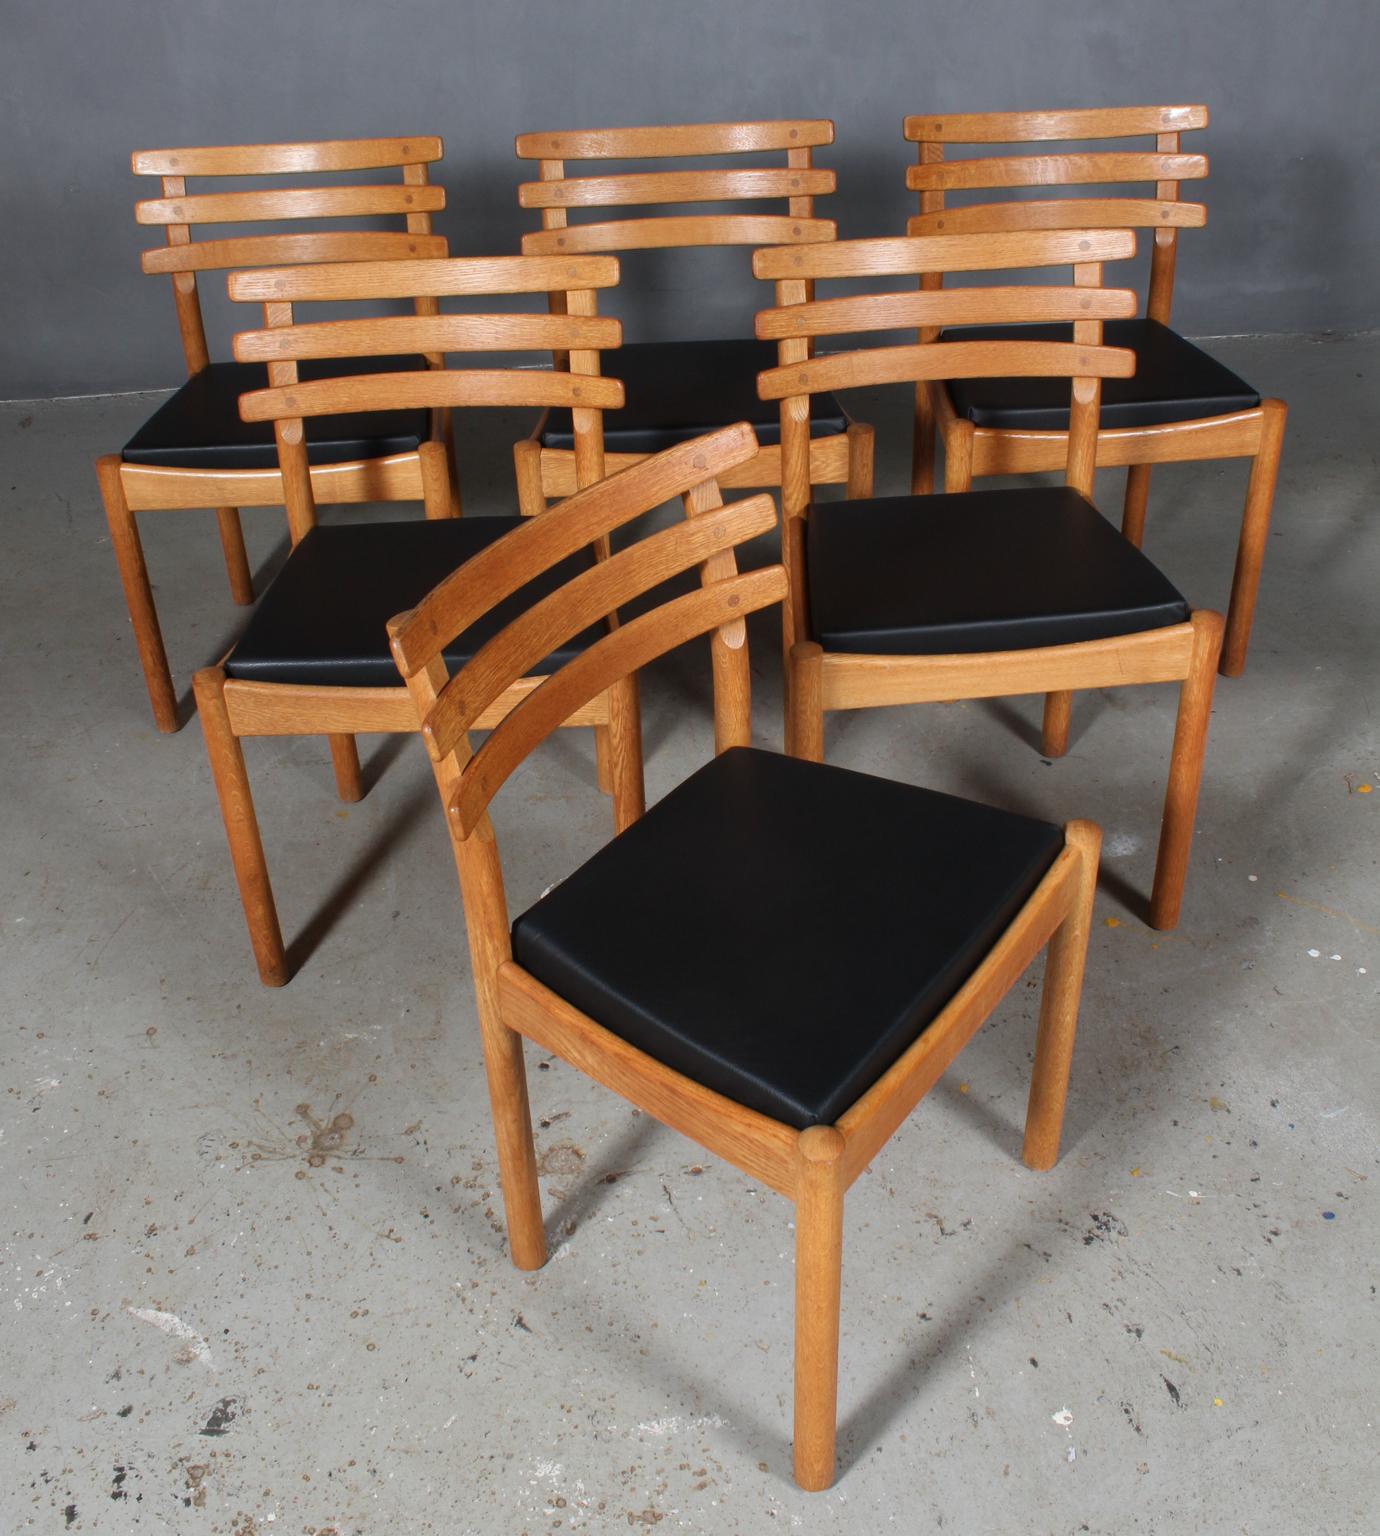 Set of six dining chairs attributed to Poul Volther with frame of oak.

New upholstered cushions with black aniline leather.

Made by FDB, probably a prototype made in the 1970s.